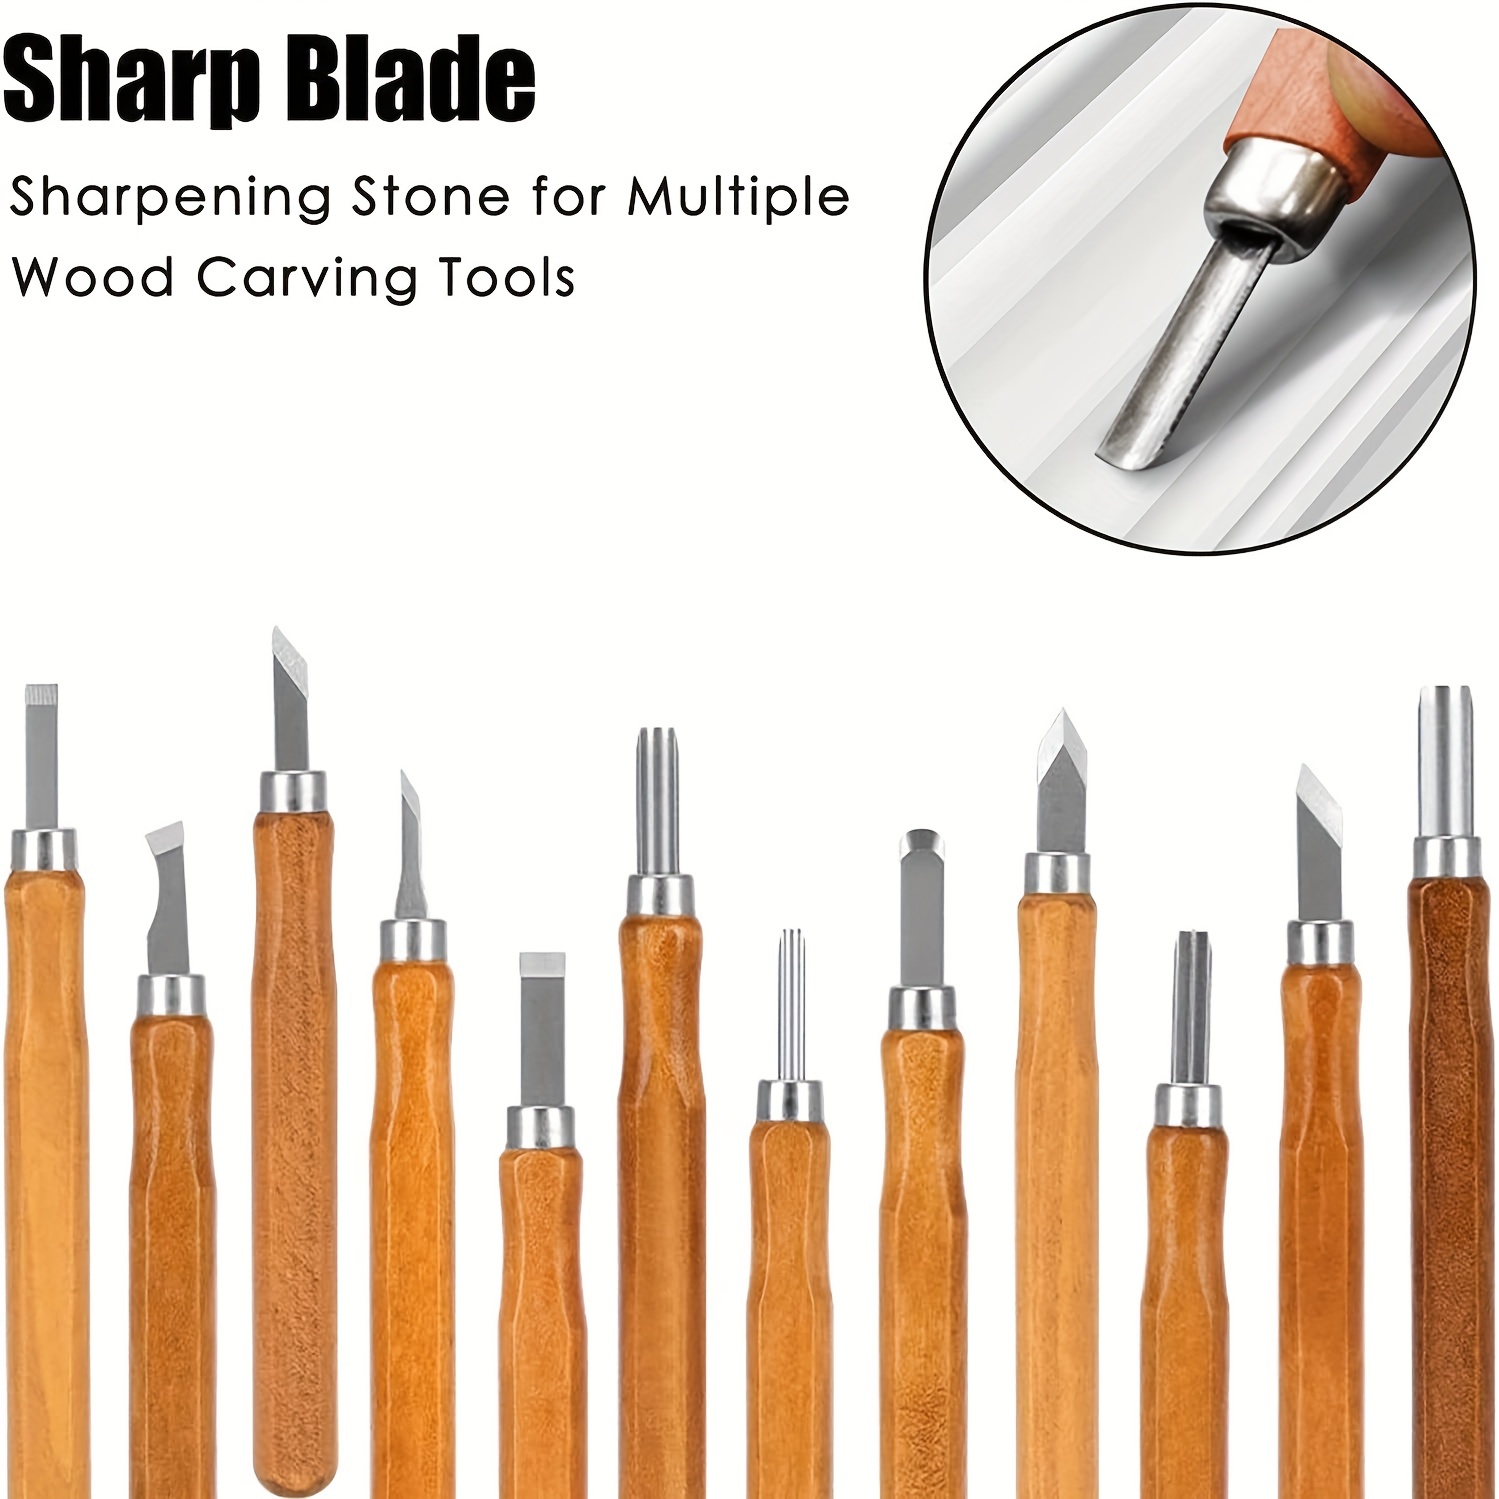 Sharp Pebble Premium Wood Carving Tools & Gouge Sharpening Stones- Two  Multi Groove Whetstones with Grit 400 and 1000